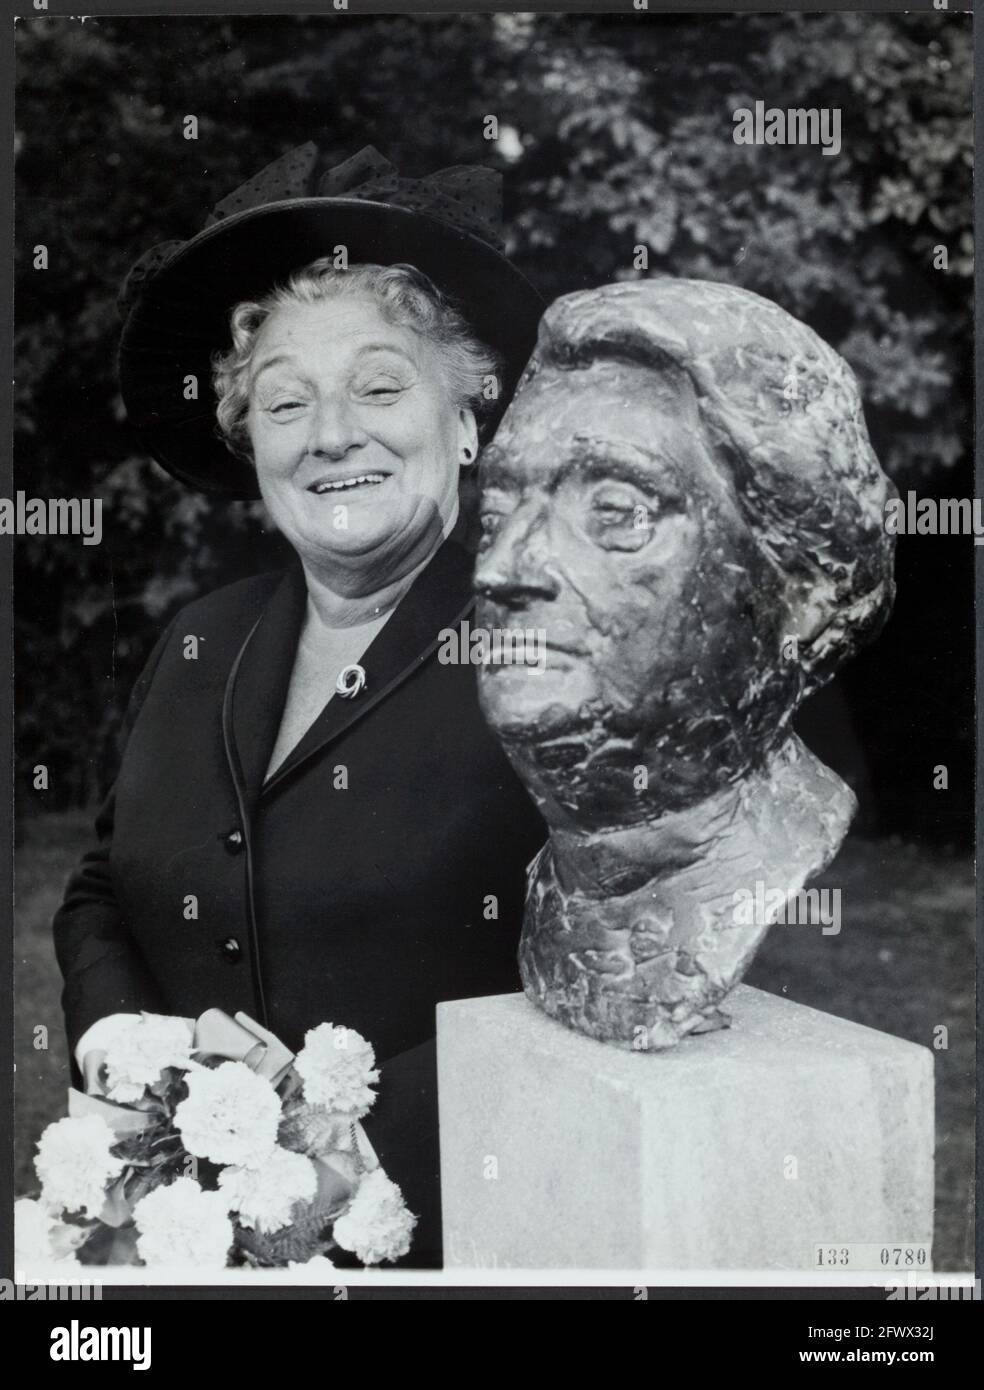 Amsterdam. Beatrixoord in Oosterpark: Mrs. Truus Weismuller-Meijer next to her bronze statue during its unveiling in 1965, undated, persecution of Jews, sculptures, relief efforts, resistance, The Netherlands, 20th century press agency photo, news to remember, documentary, historic photography 1945-1990, visual stories, human history of the Twentieth Century, capturing moments in time Stock Photo